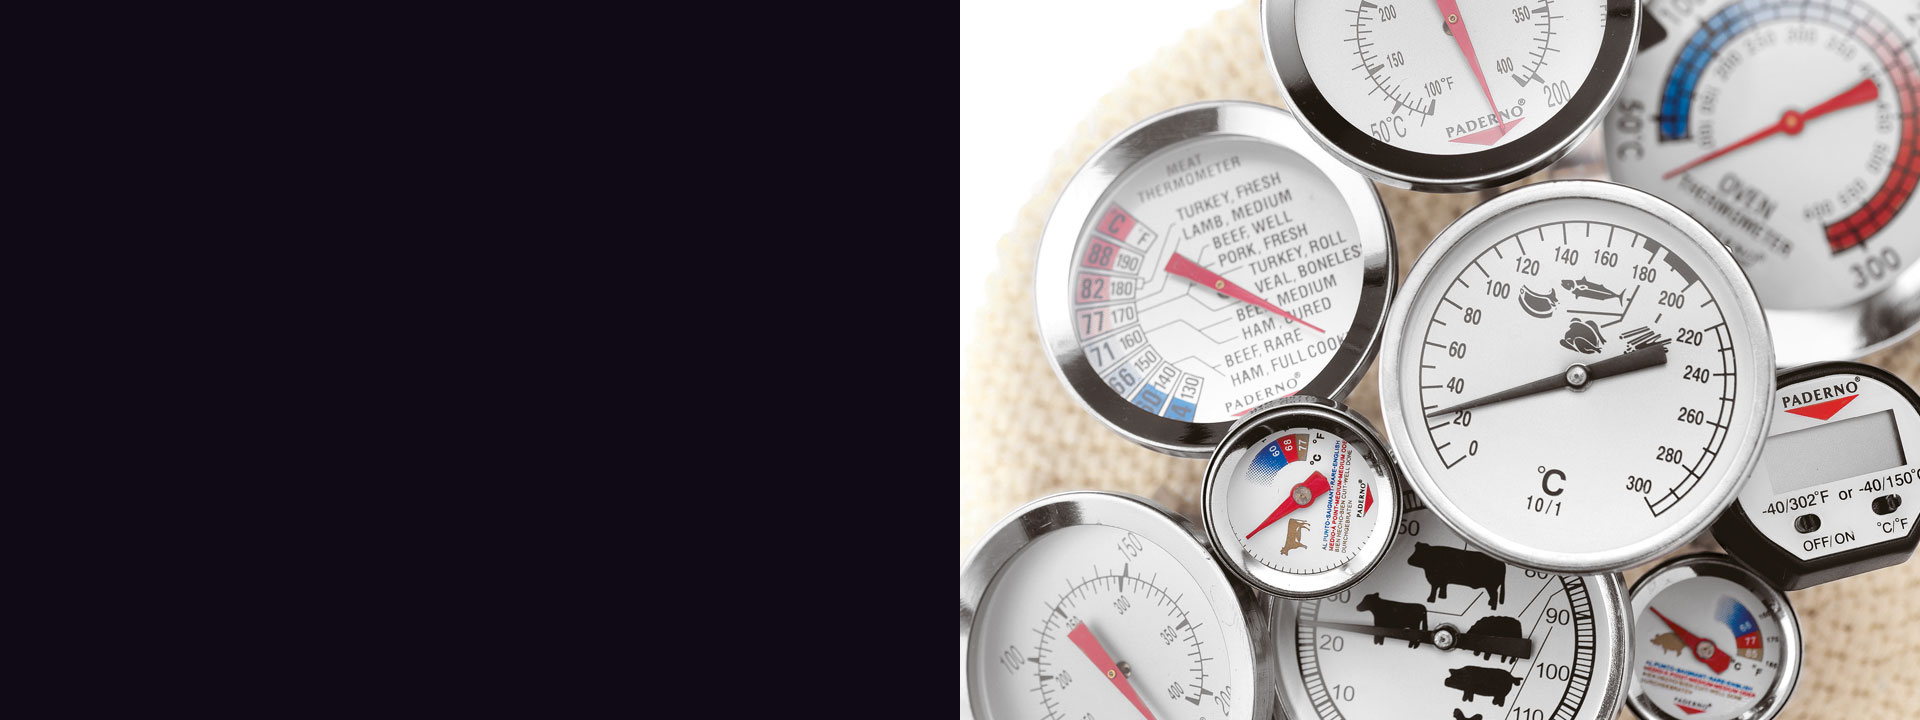 Kitchen timers and thermometers